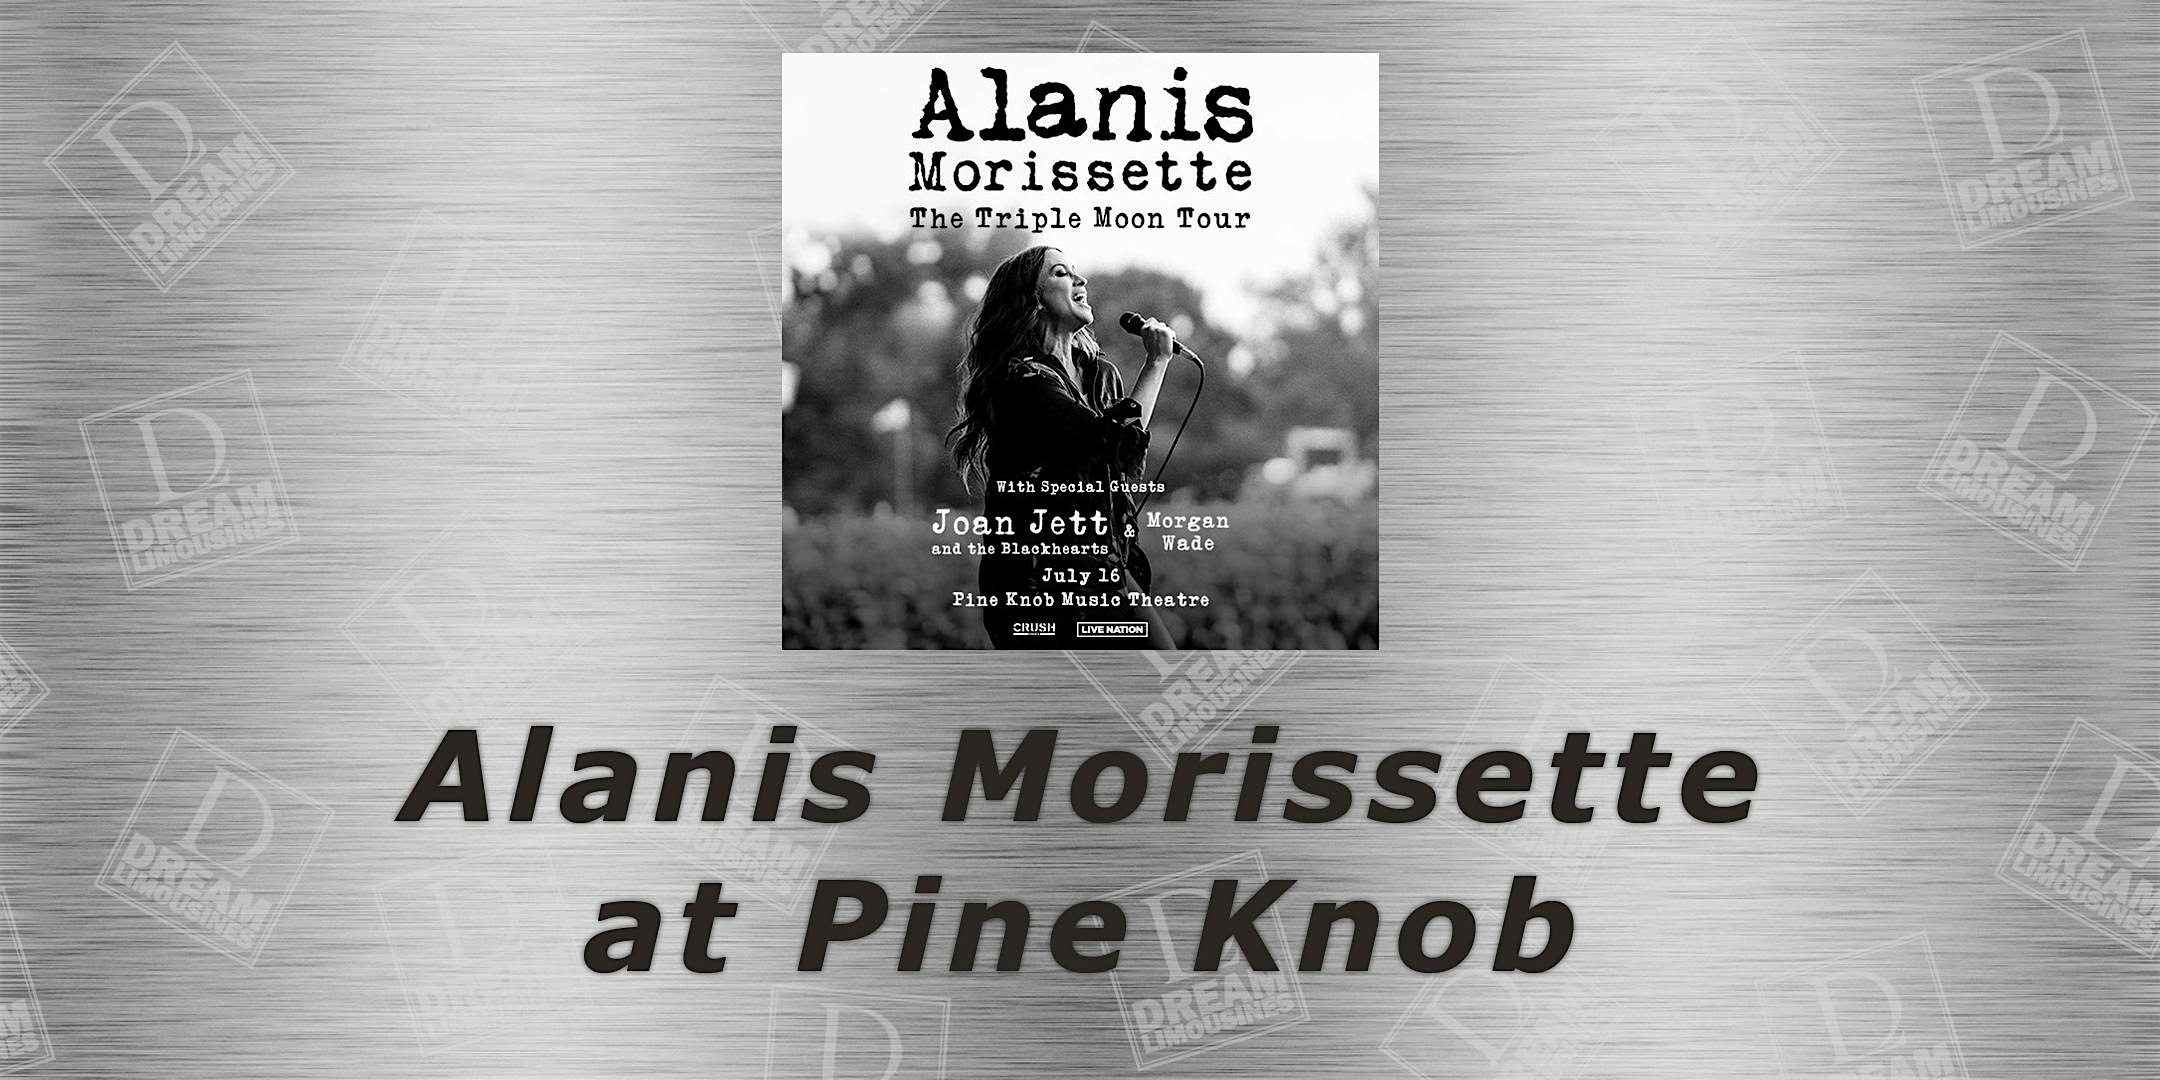 Shuttle Bus to See Alanis Morissette at Pine Knob Music Theatre